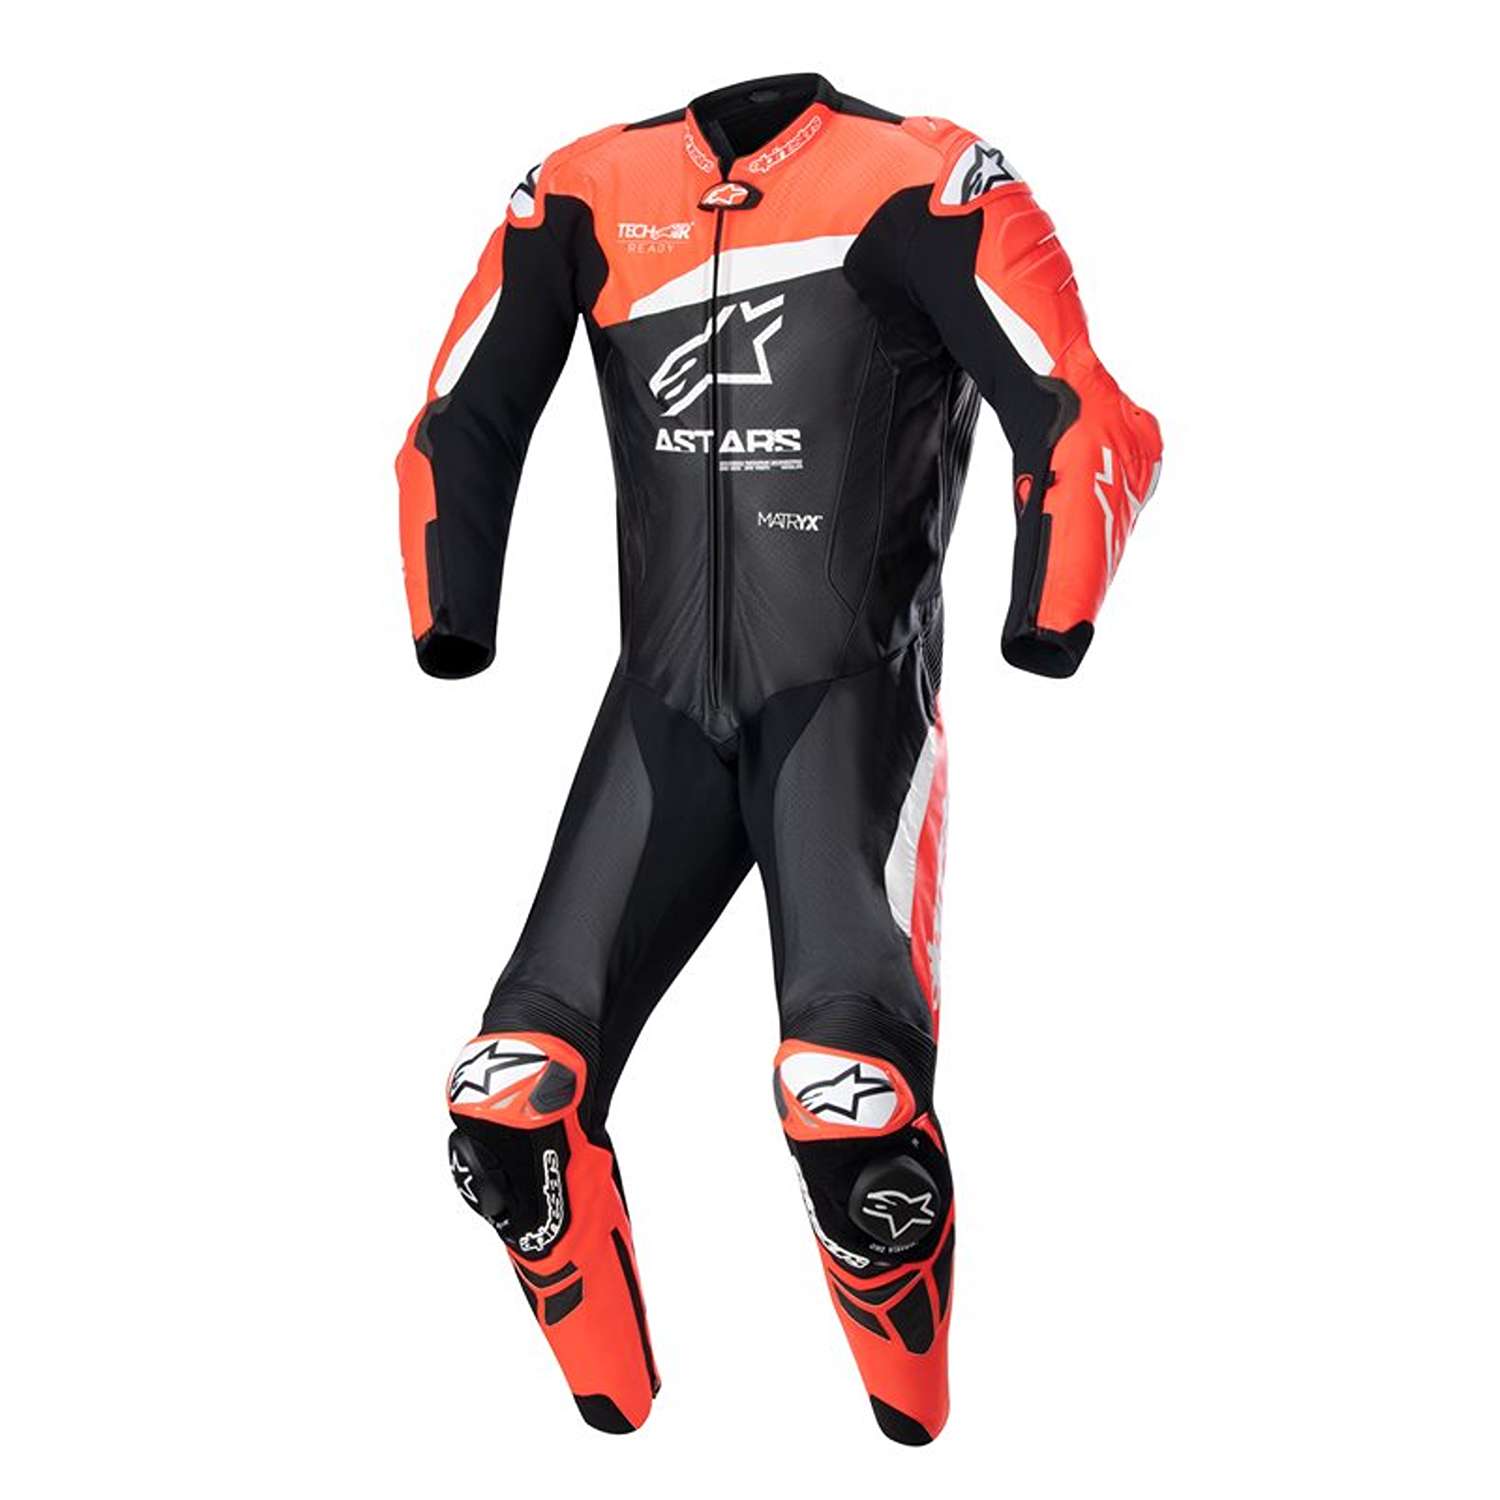 Image of Alpinestars Gp Plus V4 1Pc Leather Suit Black Red Fluo White Size 58 ID 8059347160153